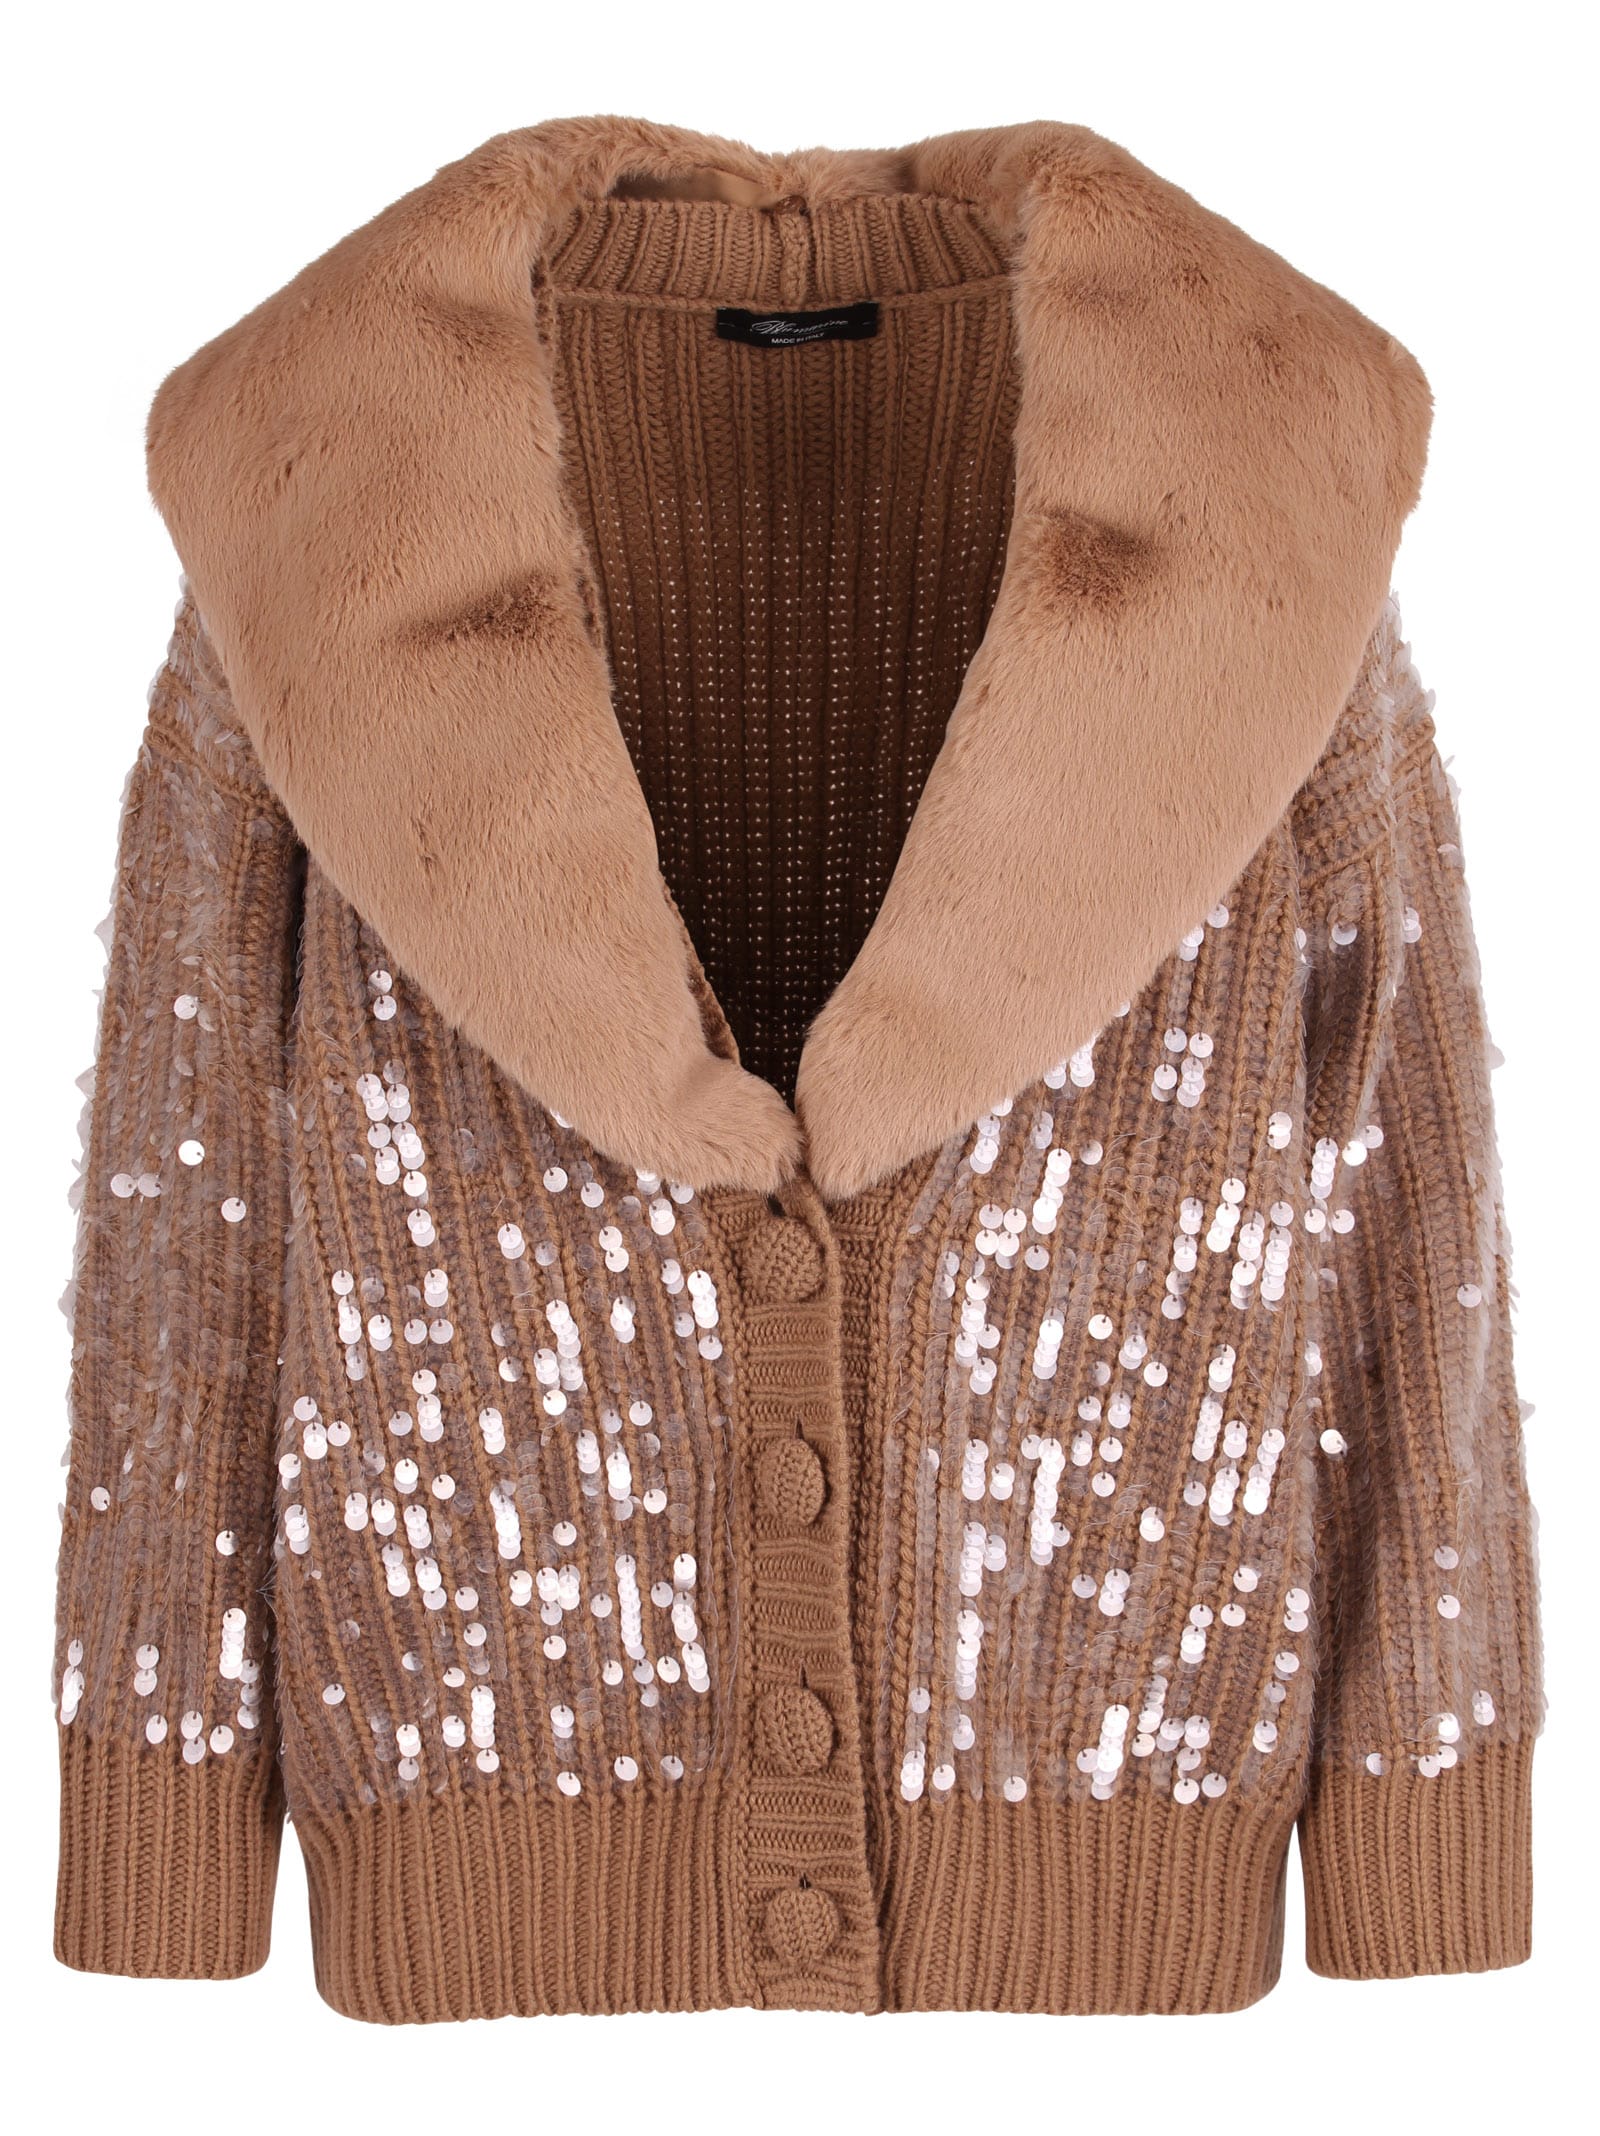 Blumarine Knitted All-over Sequins Embellished Wool Cardigan